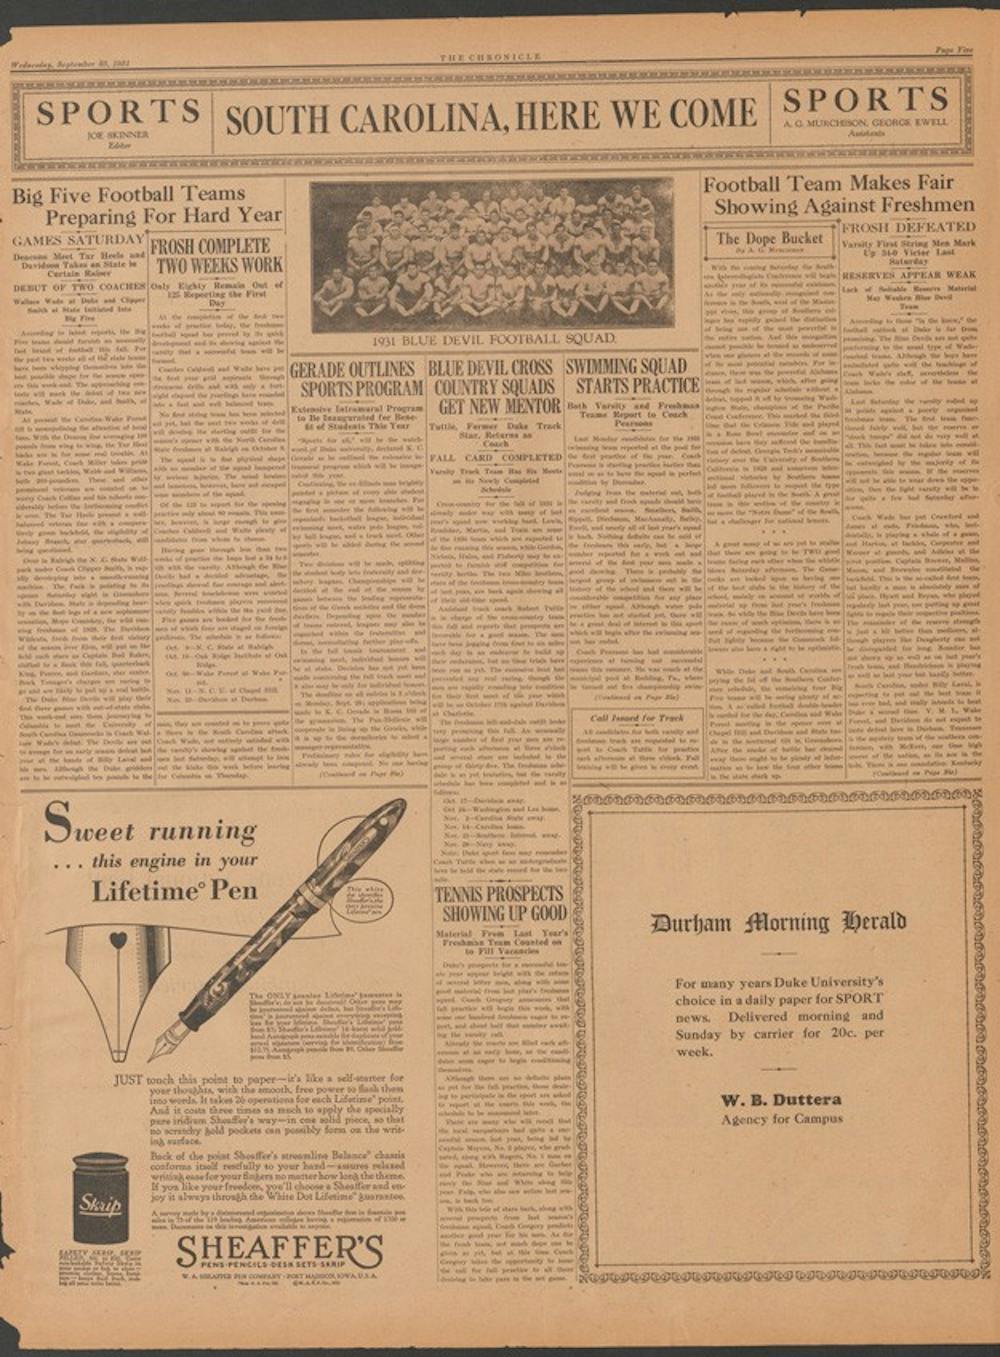 The Chronicle previewed Duke's first of 153 games under legendary head coach Wallace Wade 85 years ago.